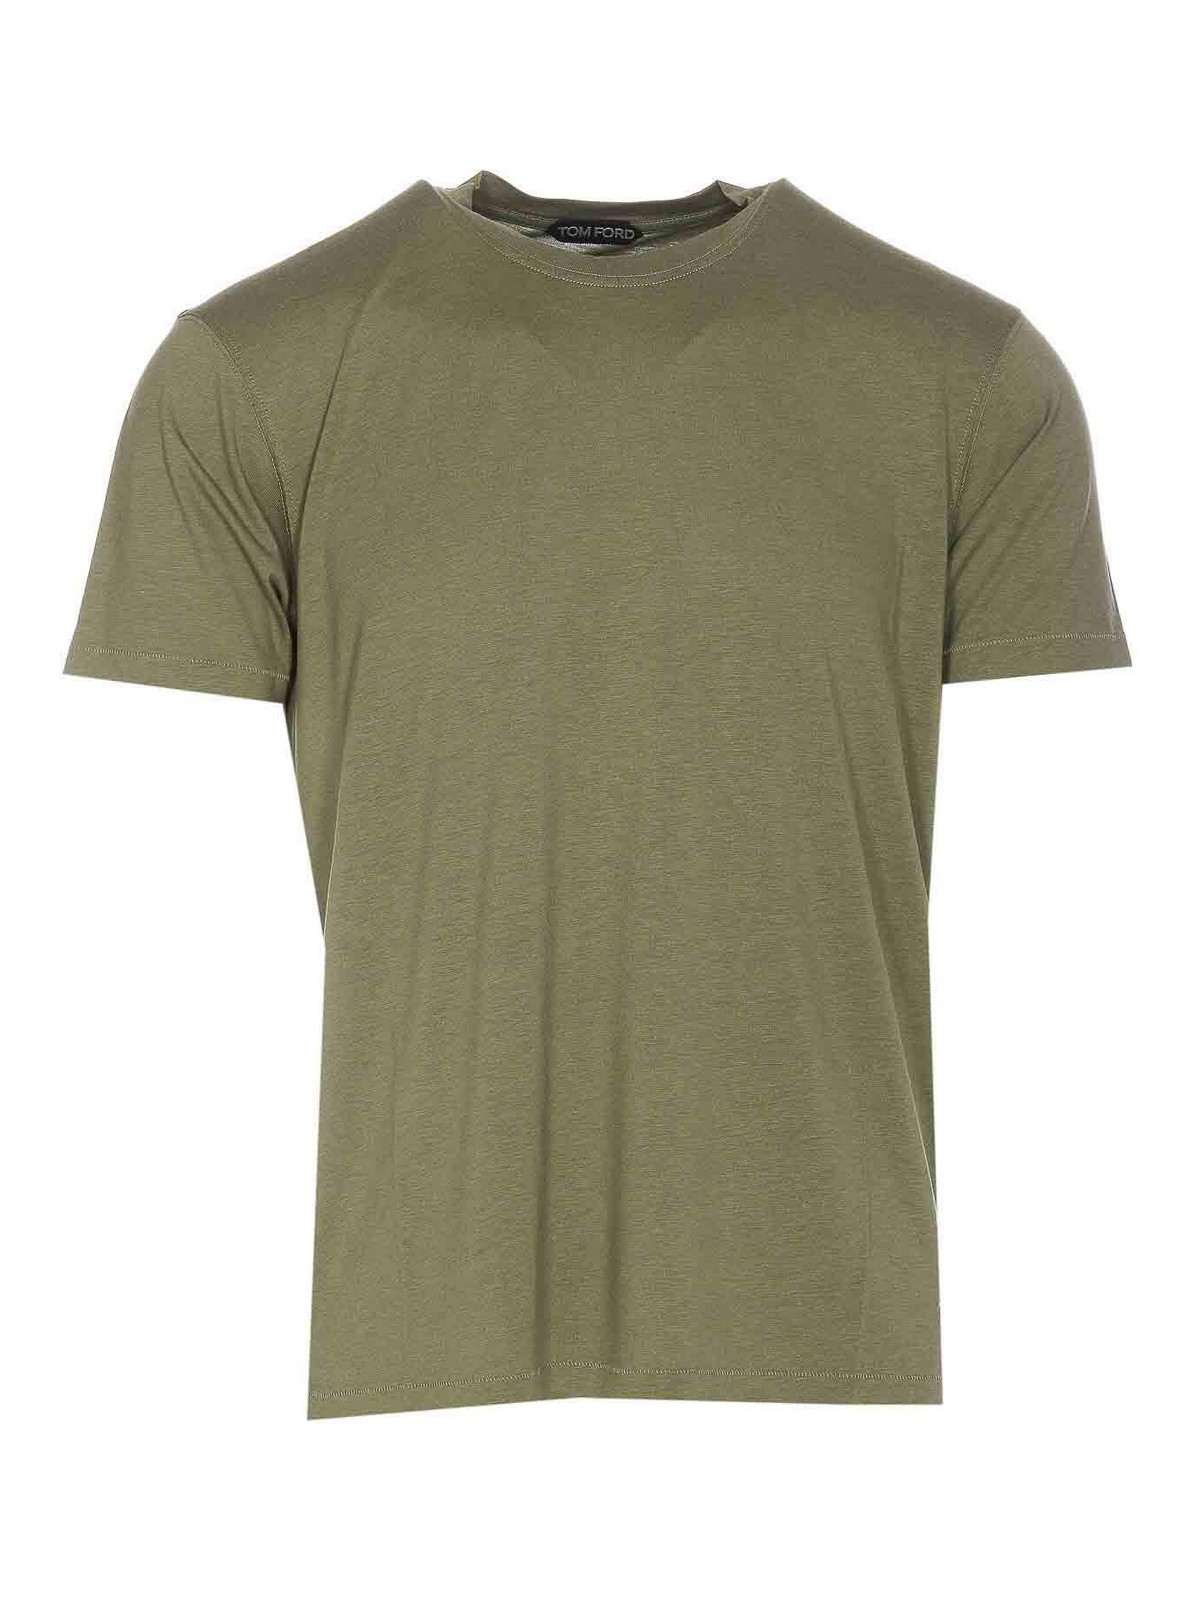 Tom Ford Pale Army Green Tee Crewneck